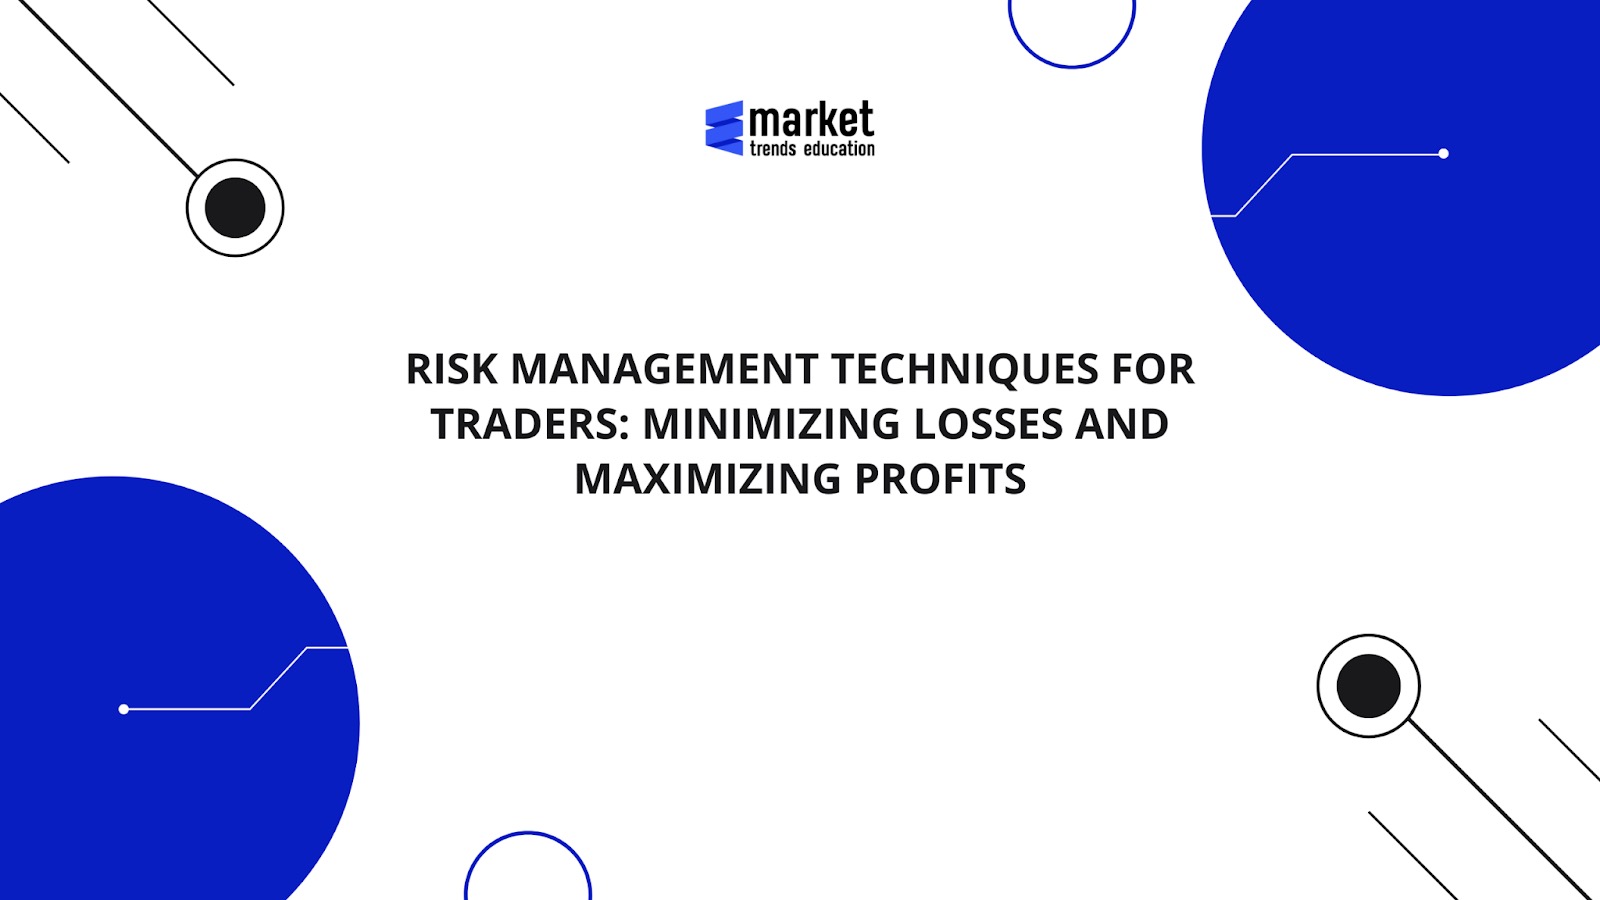 Risk Management Techniques for Traders: Minimizing Losses and Maximizing Profits